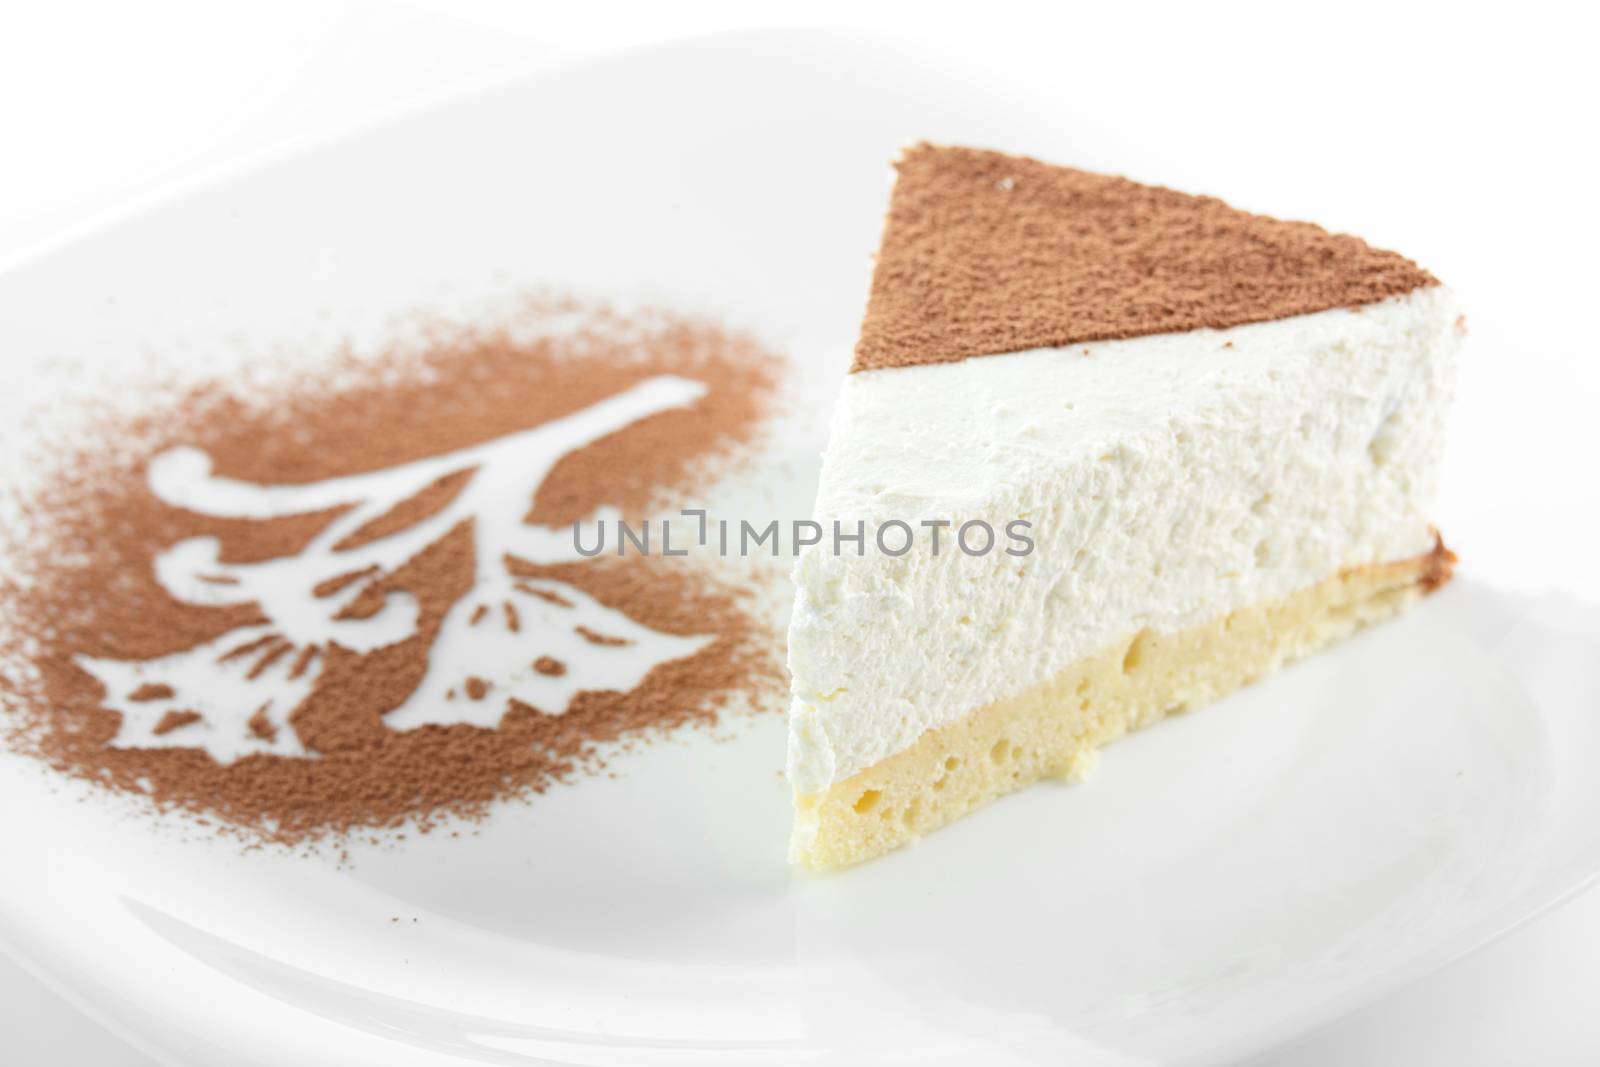 Peace of cake by fiphoto